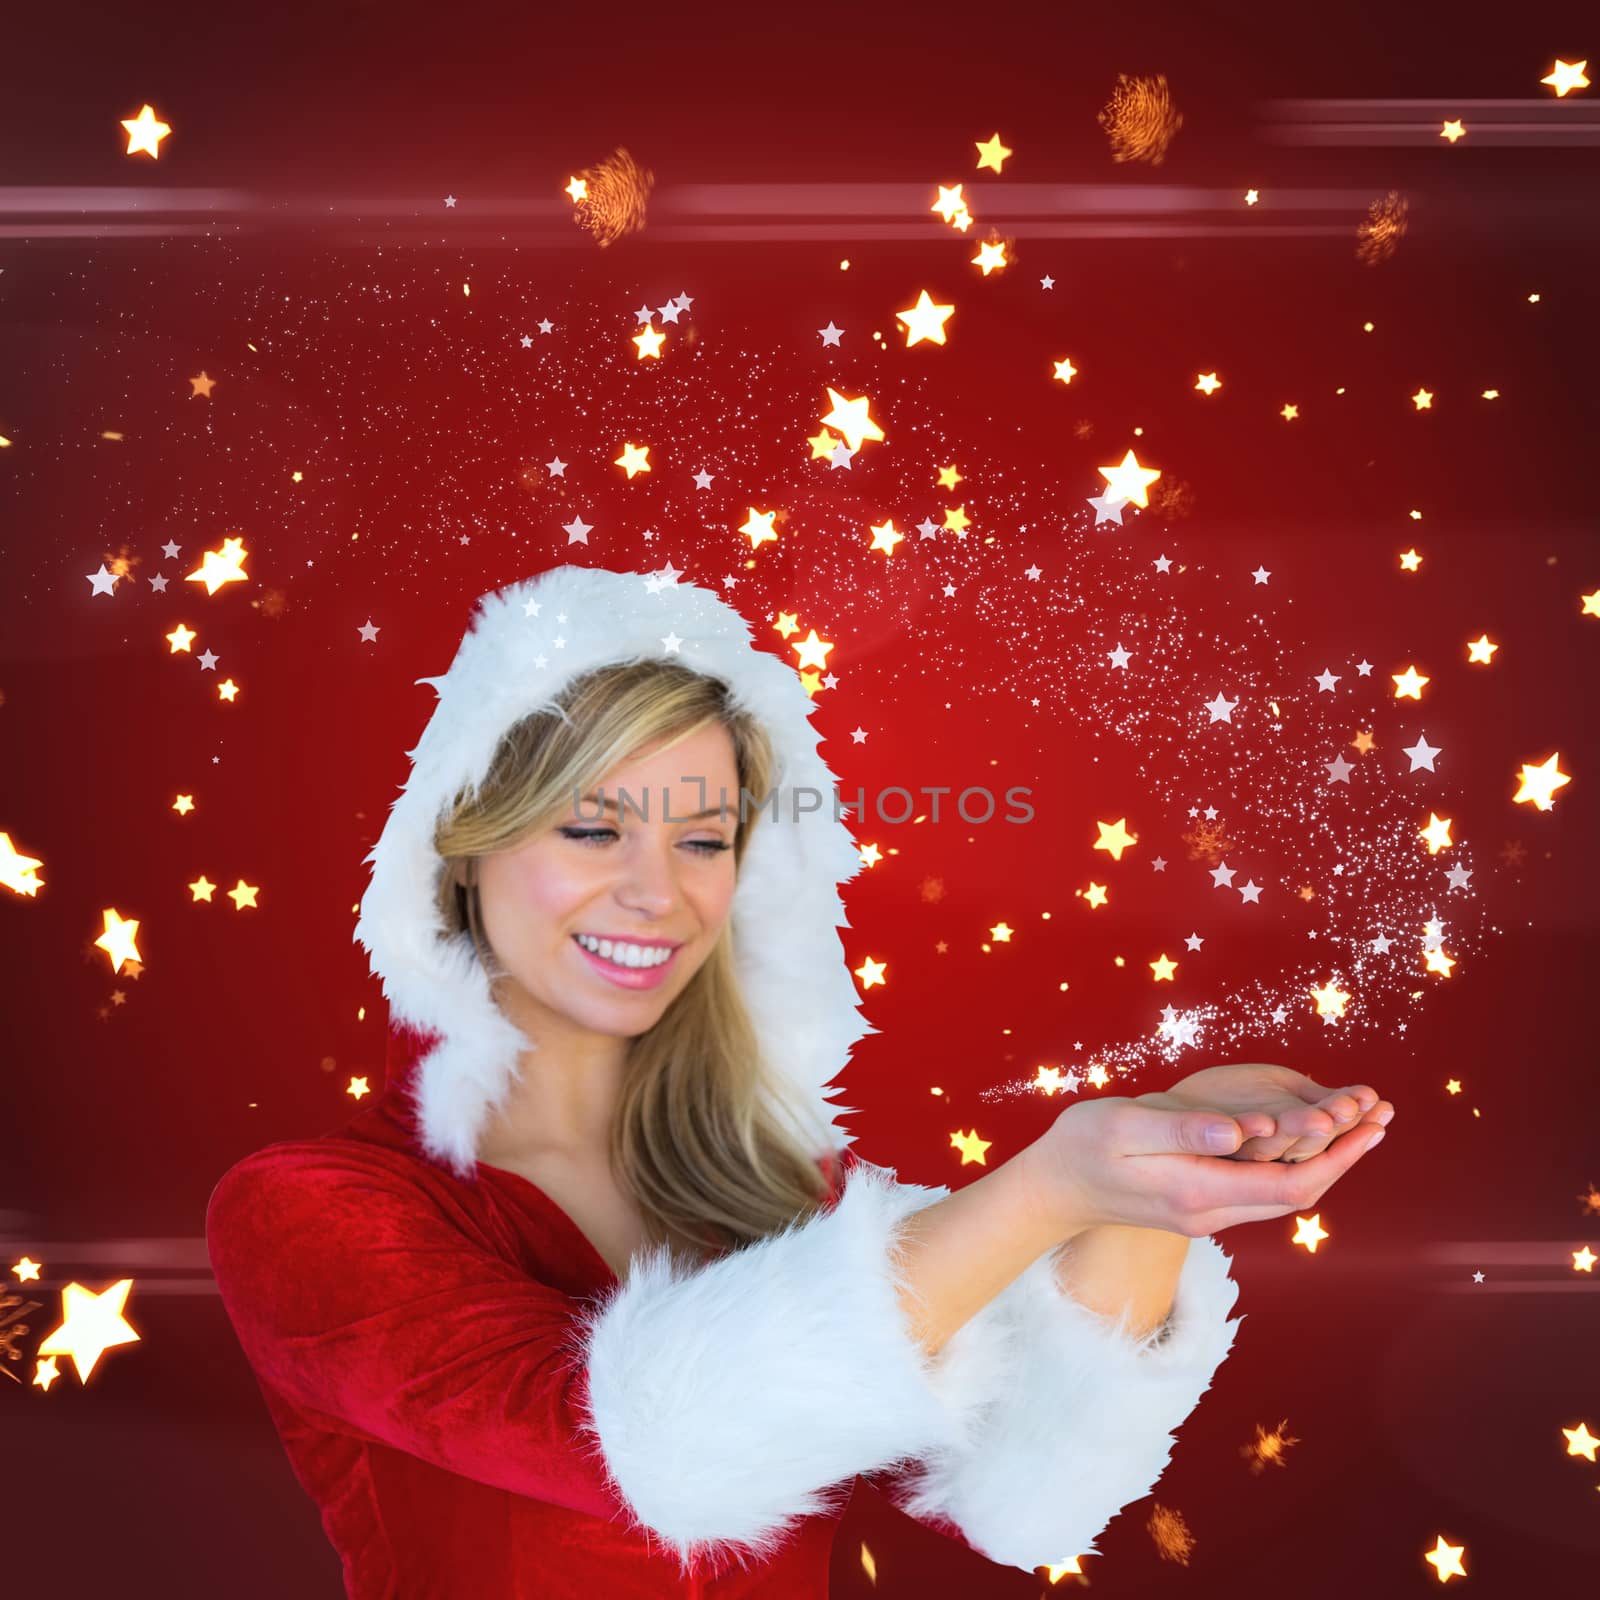 Pretty girl holding hands out in santa outfit against bright star pattern on red